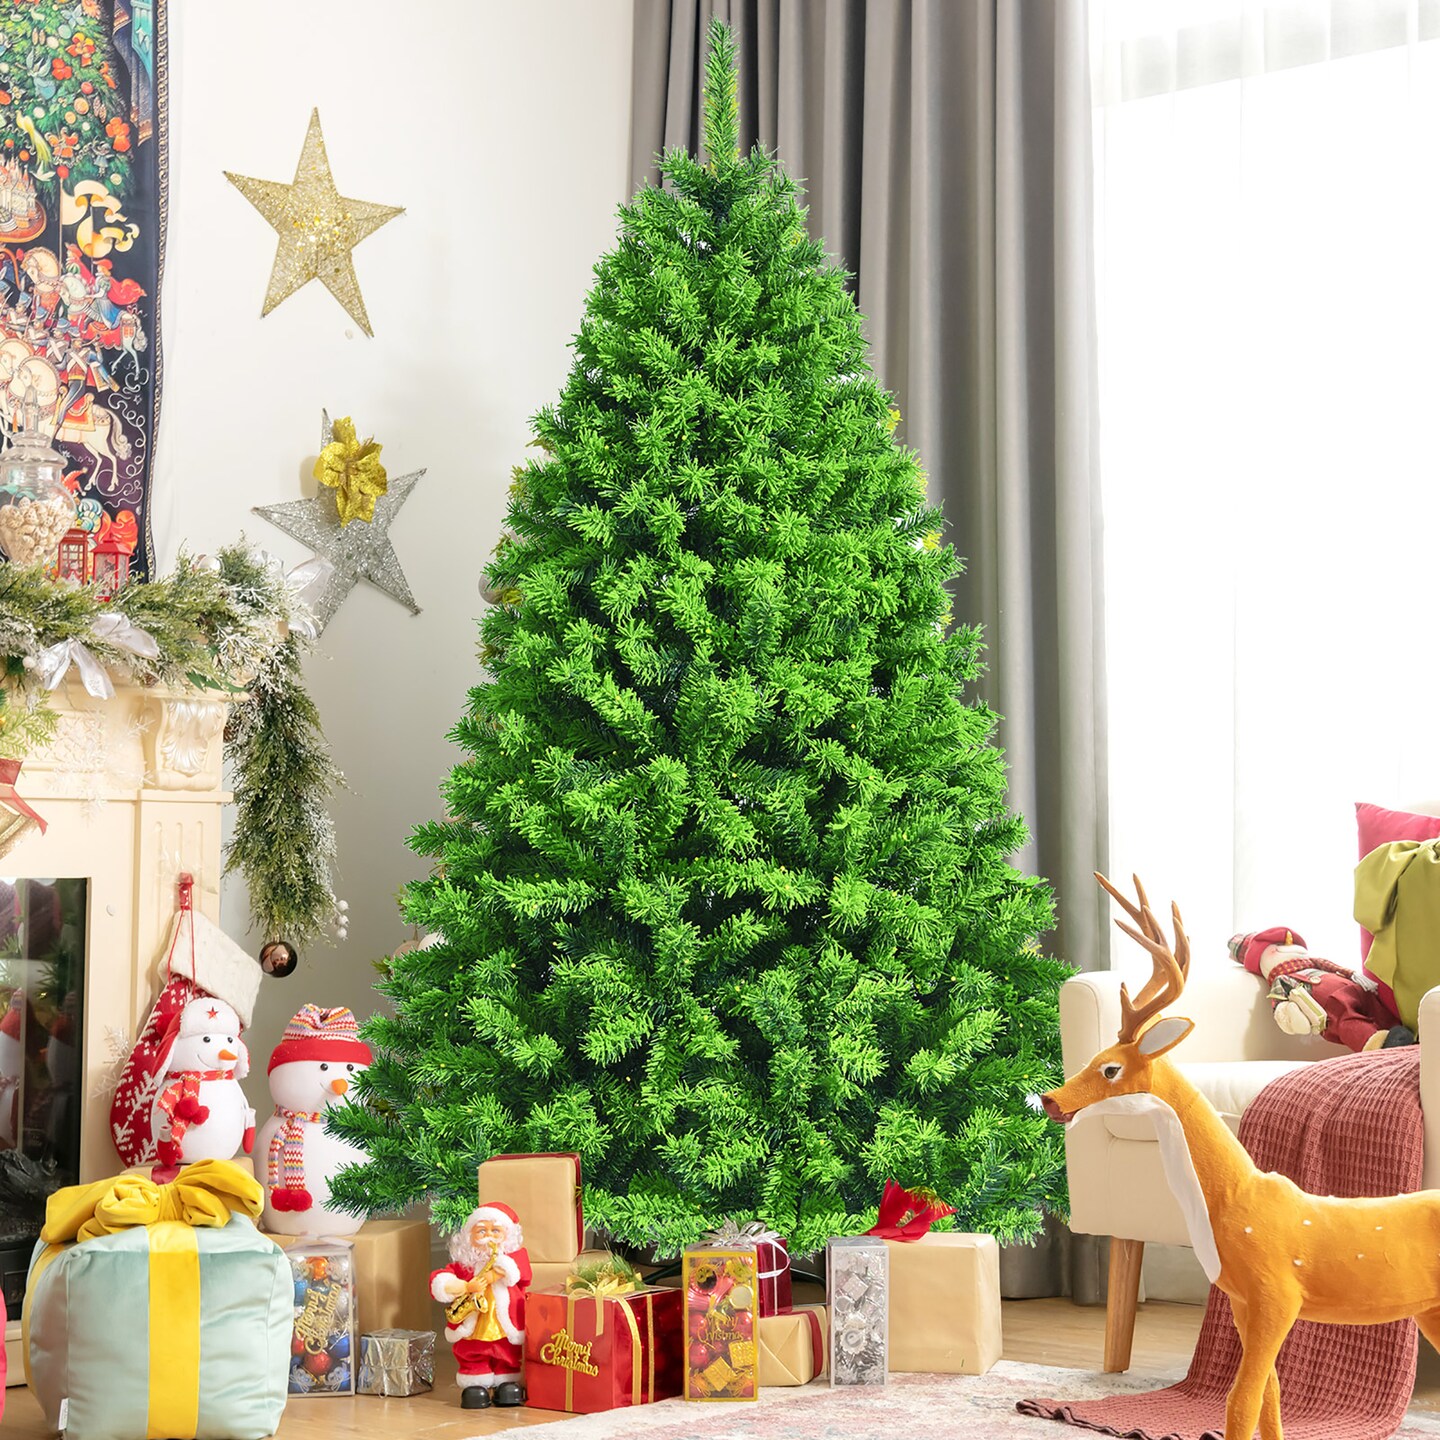 Costway 4.5FT/6.5FT/7.5FT Pre-Lit Hinged Christmas Tree Green Flocked with 392/924/1404 Tips &#x26; 150/370/530 LED Lights